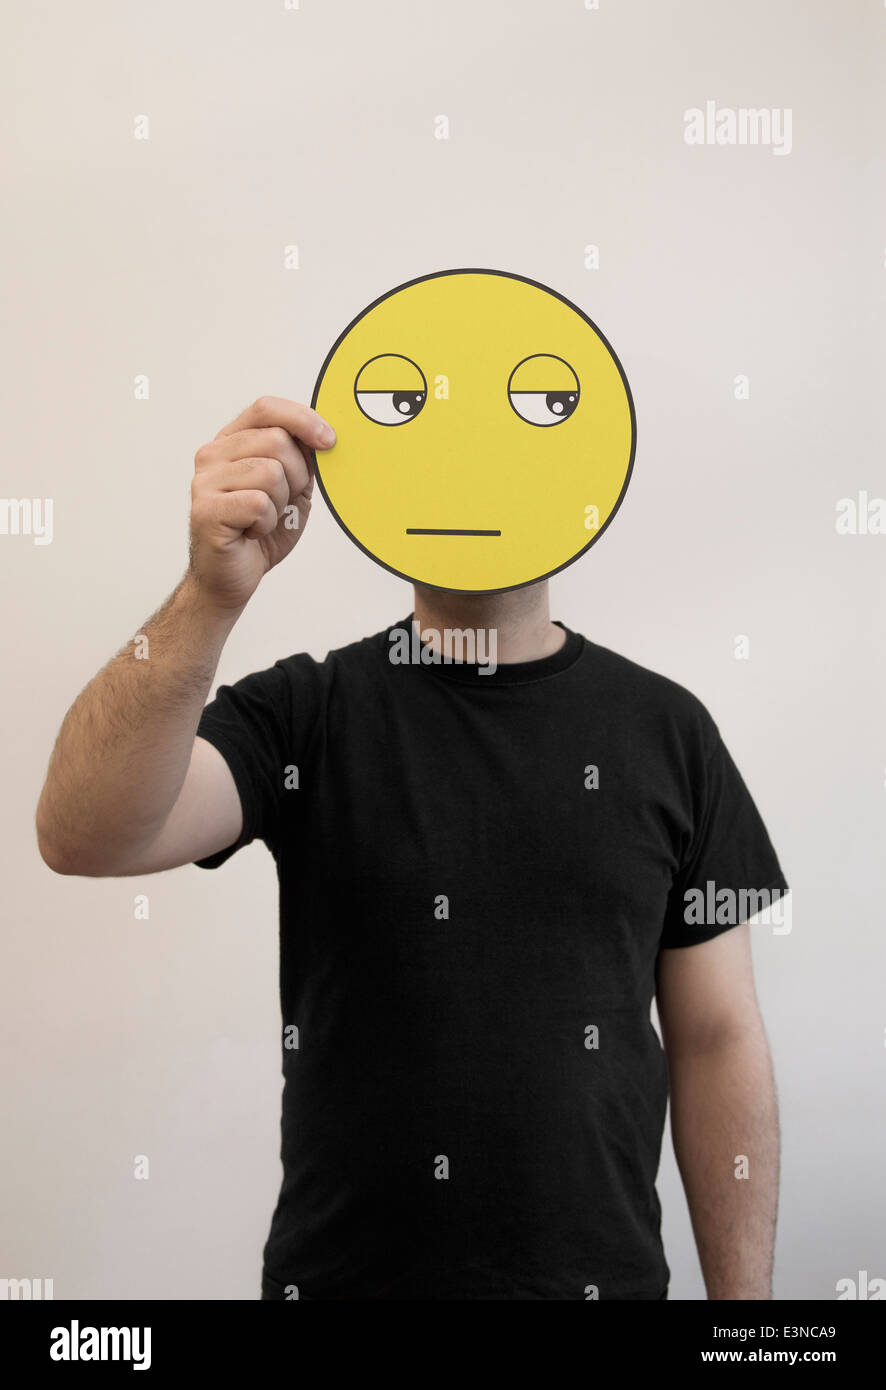 Man holding a bored emoticon face in front of his face Stock Photo